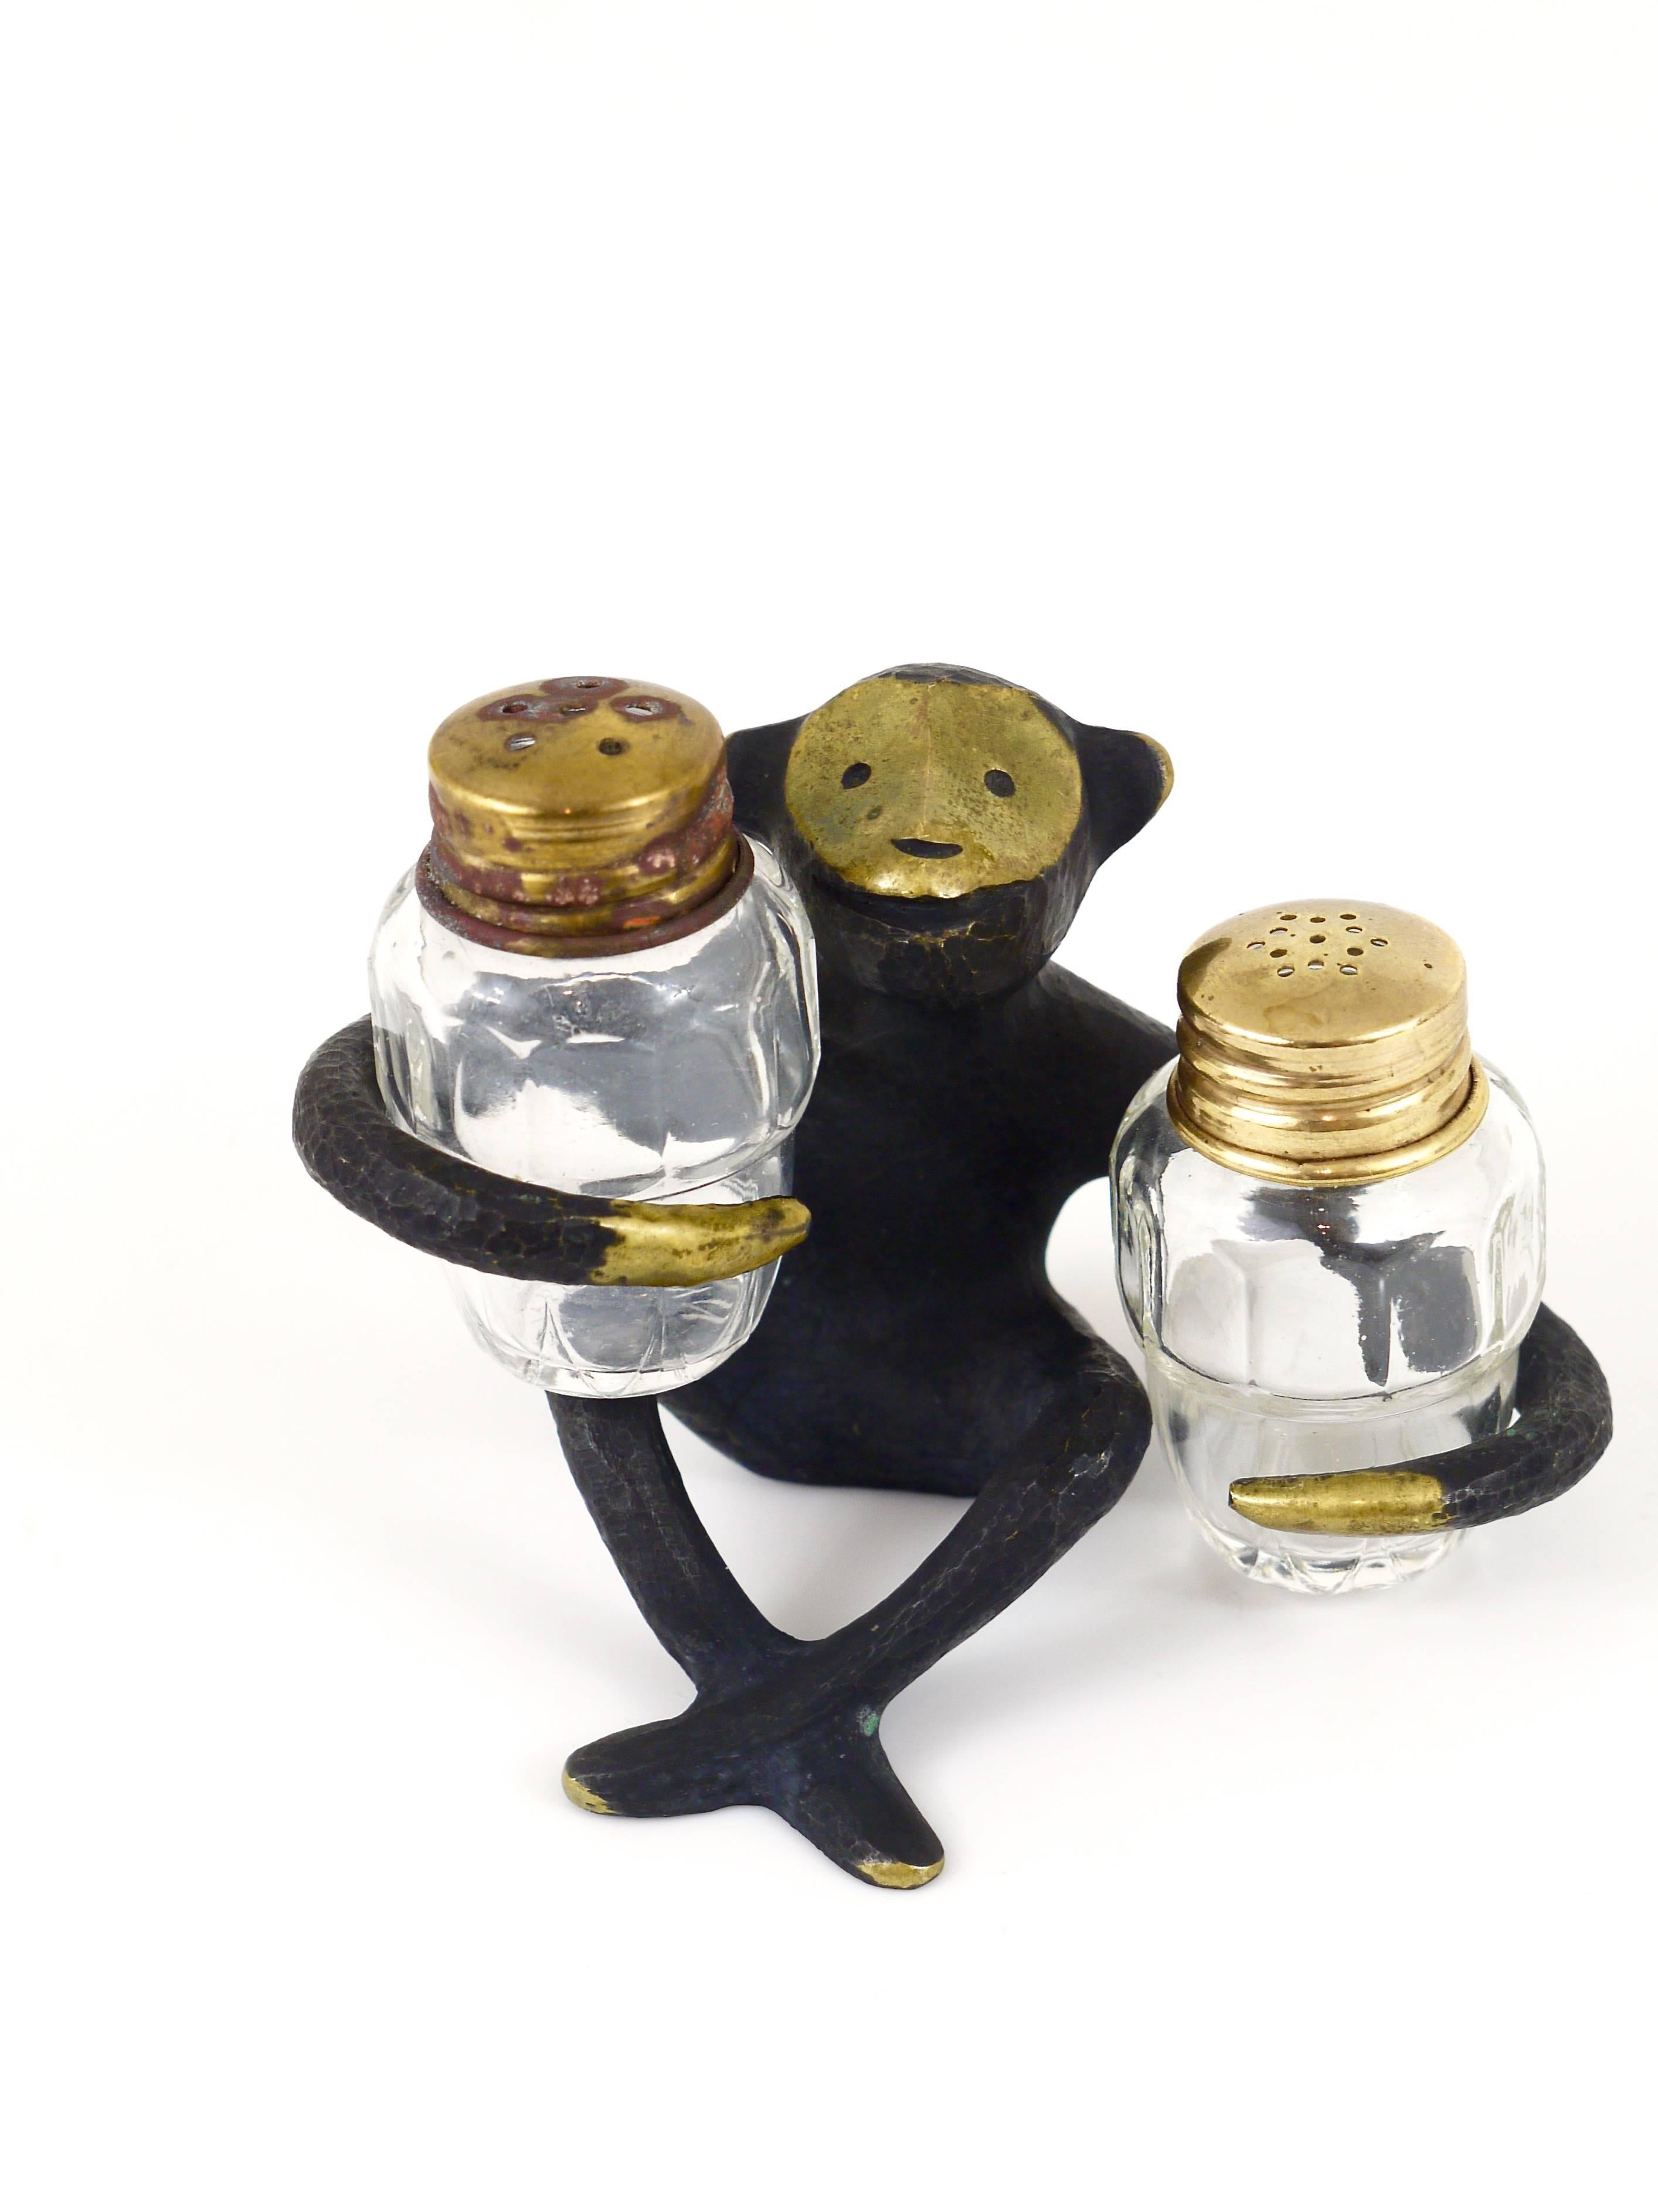 A very charming Austrian shaker set, displaying a monkey. A very humorous design by Walter Bosse, manufactured by Baller Austria in the 1950s. Made of brass, in very good condition with nice patina.